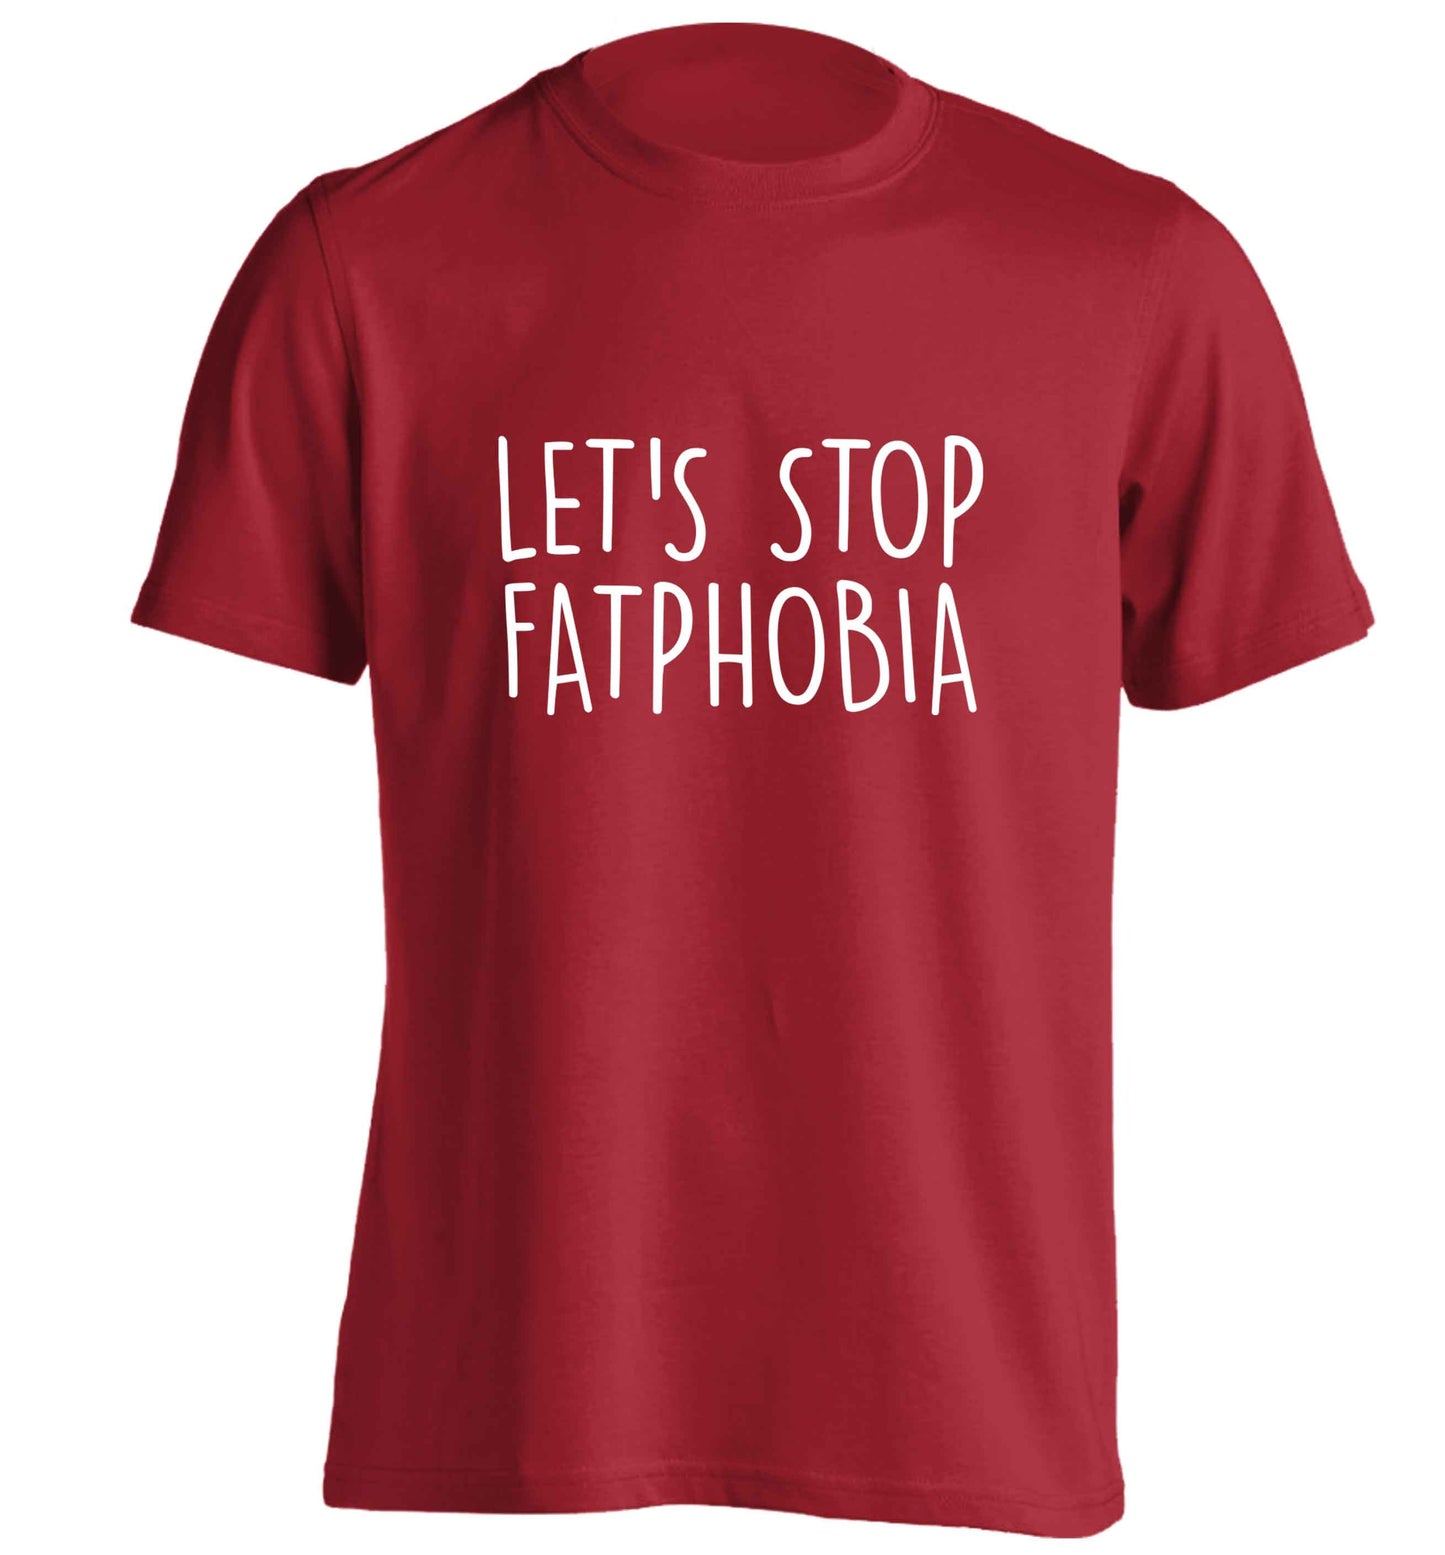 Let's stop fatphobia adults unisex red Tshirt 2XL